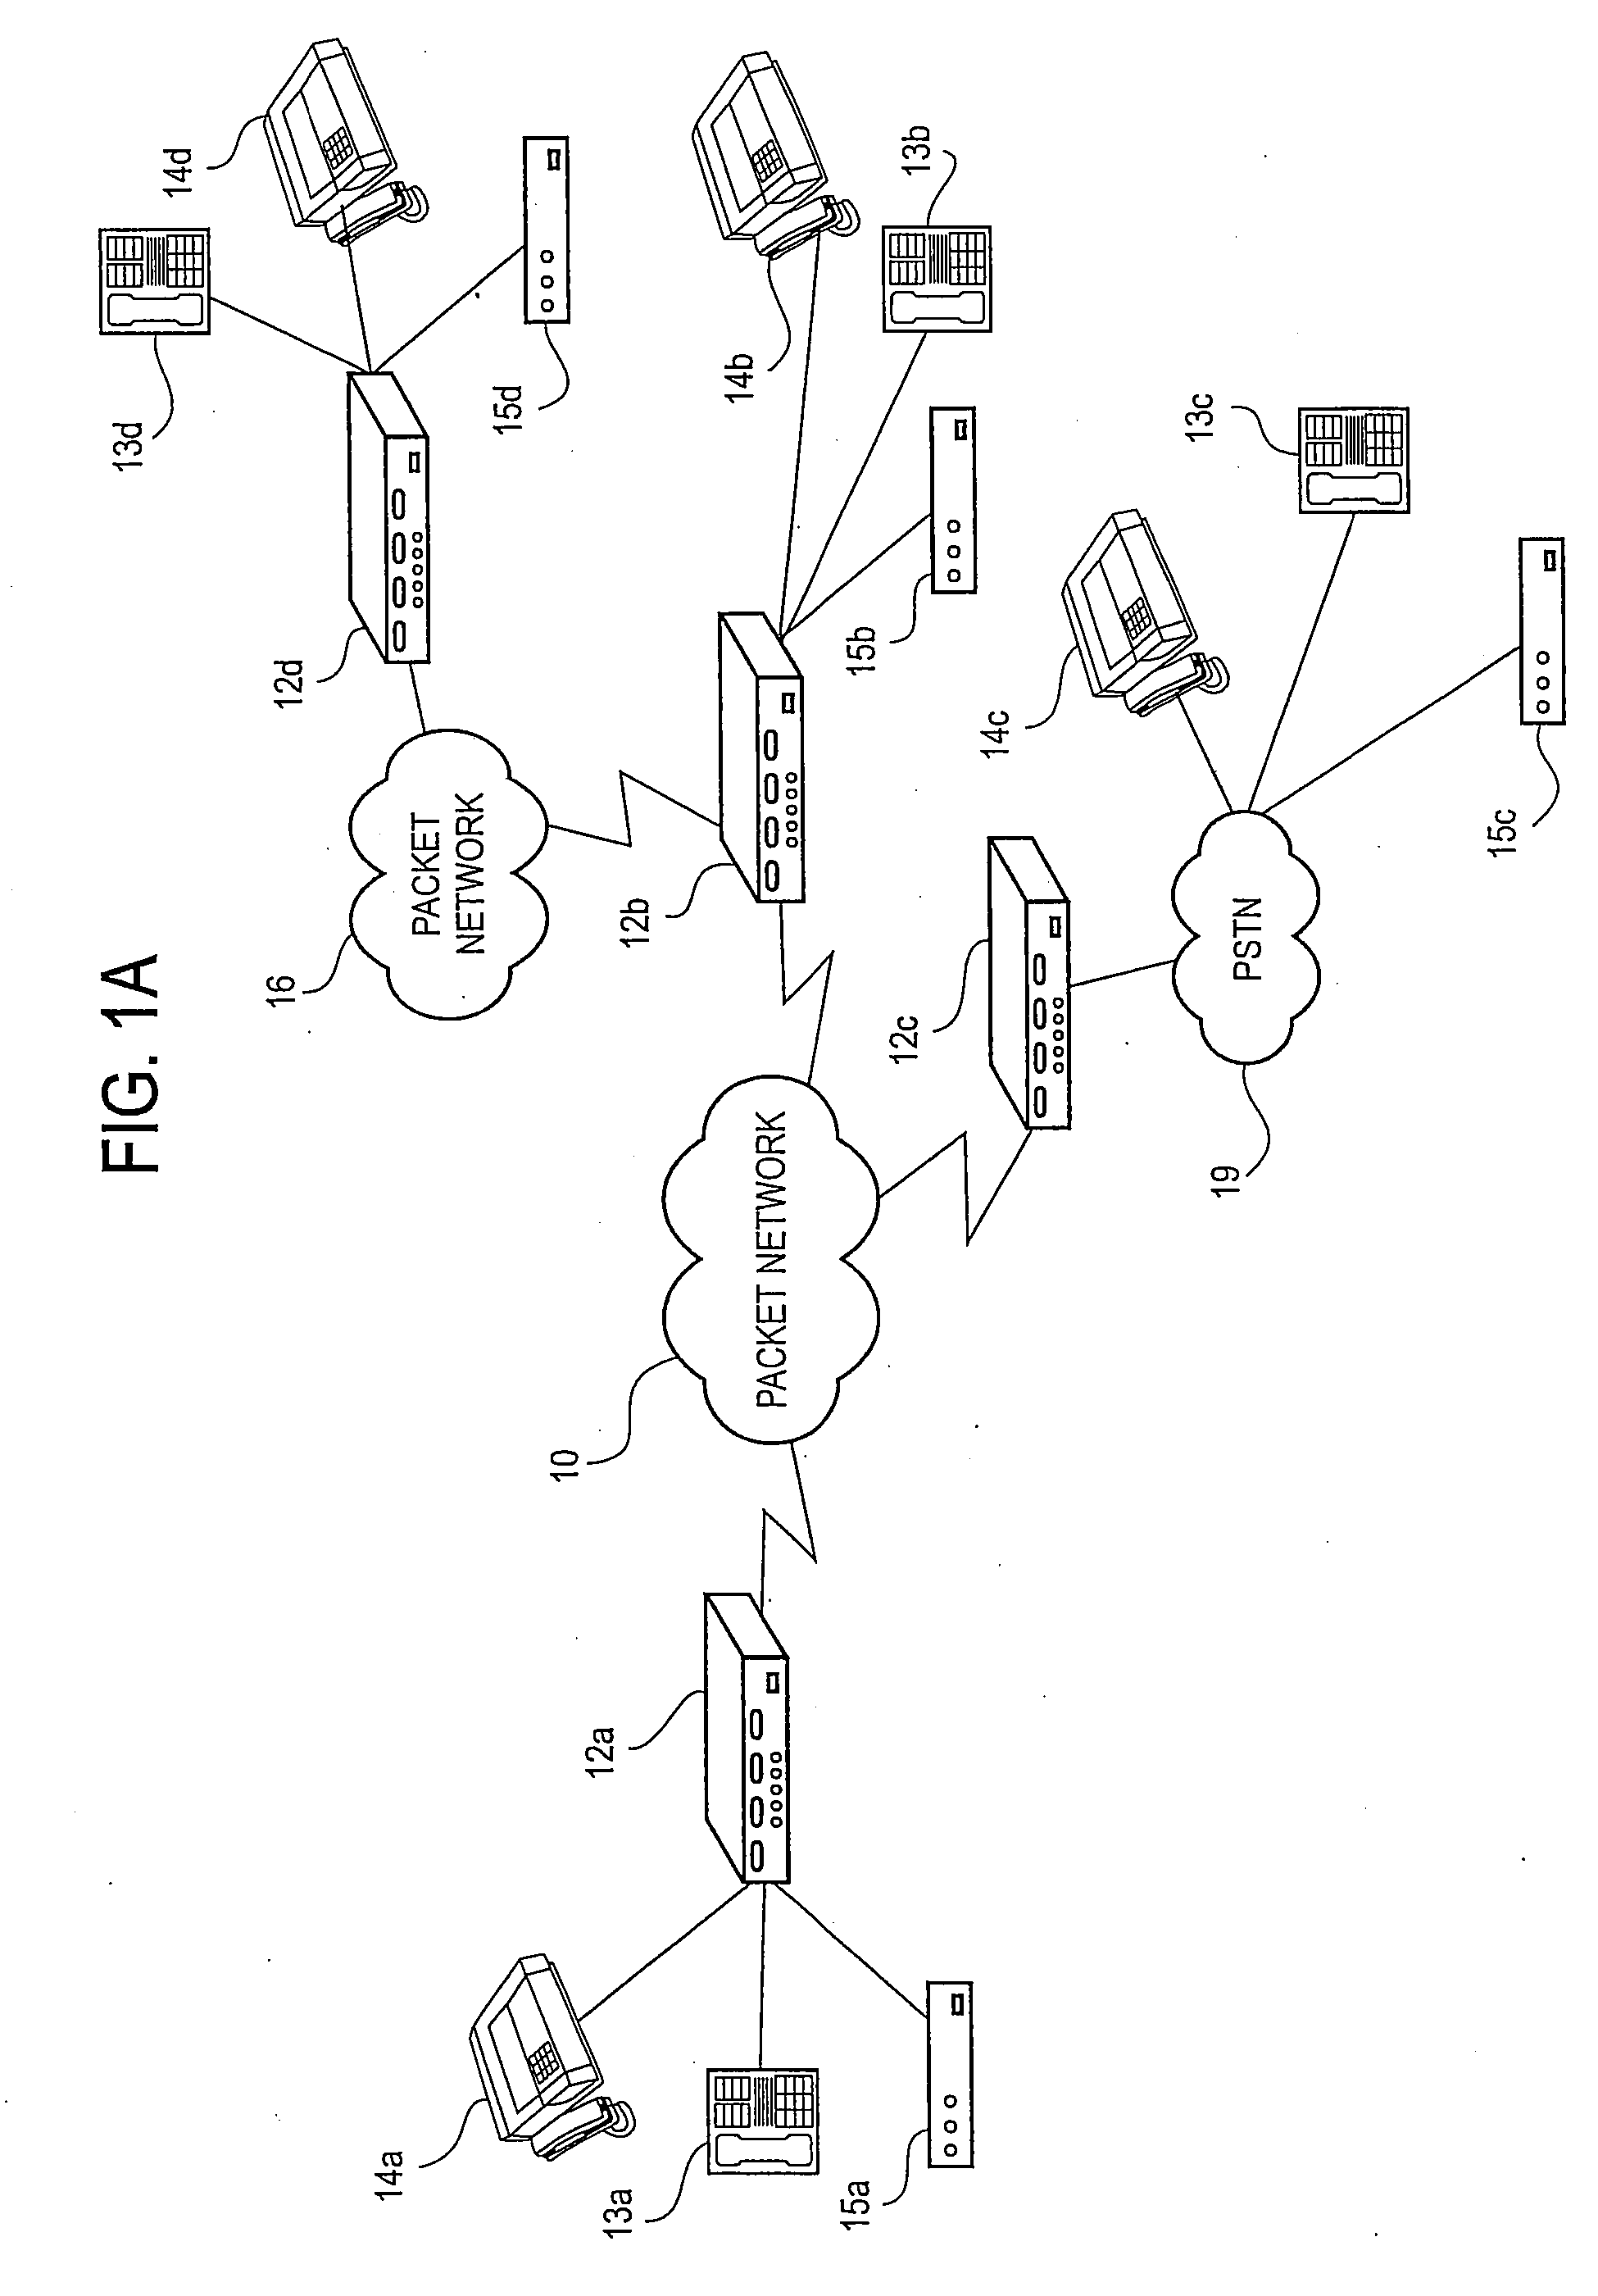 Adaptive gain control based on echo canceller performance information